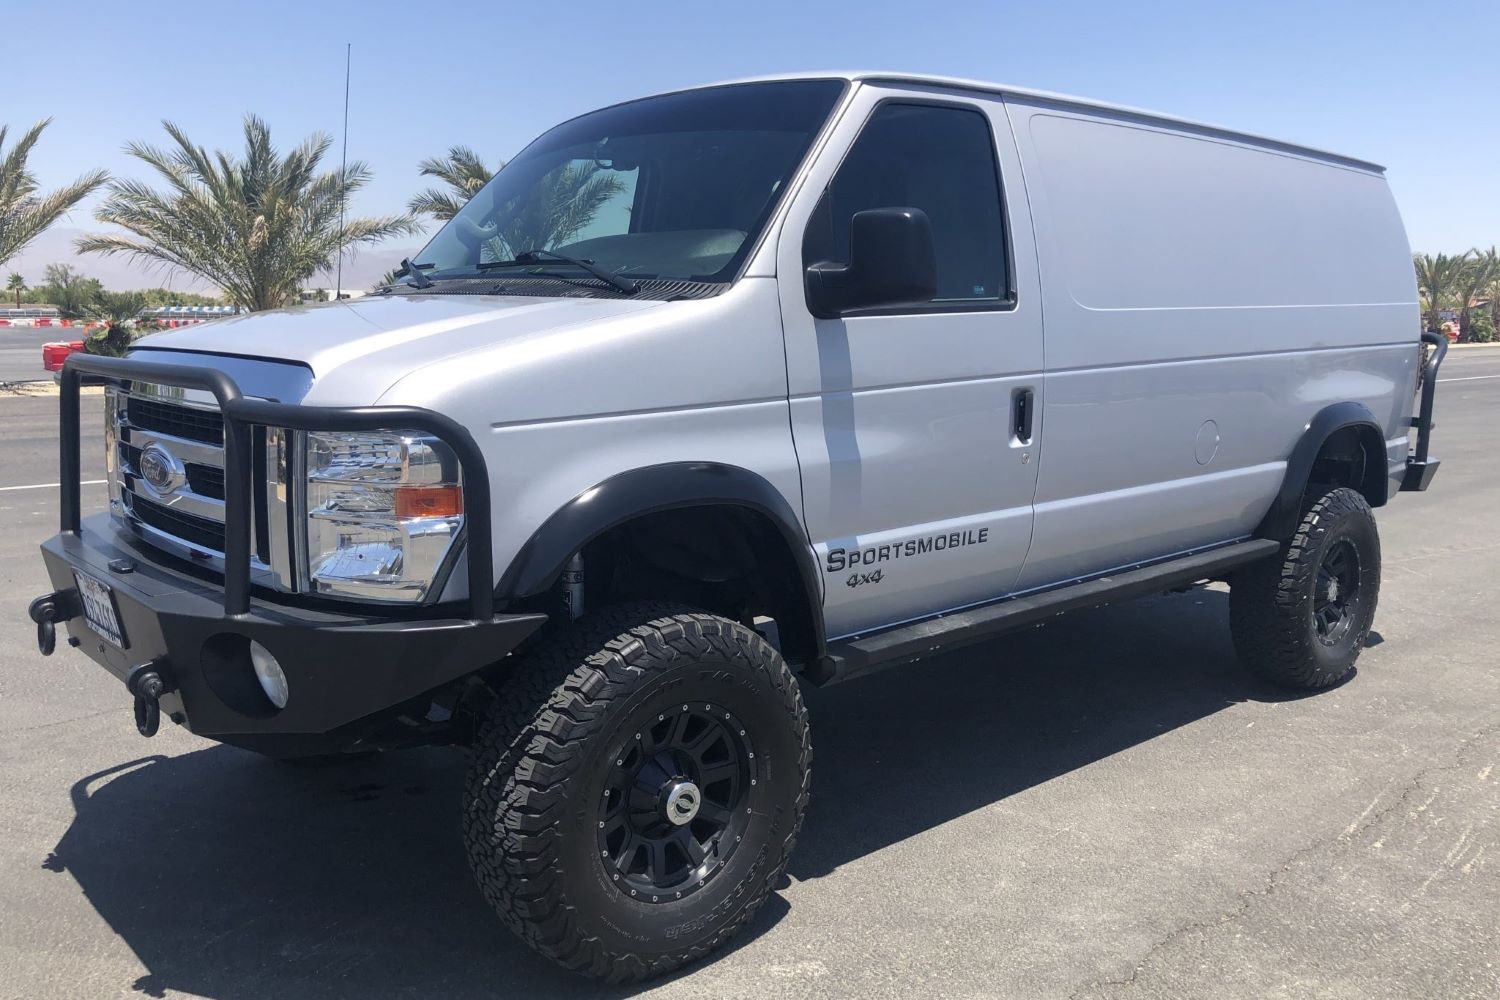 Rugged 2013 Ford E-350 Sportsmobile 4×4 Conversion Heads To Auction